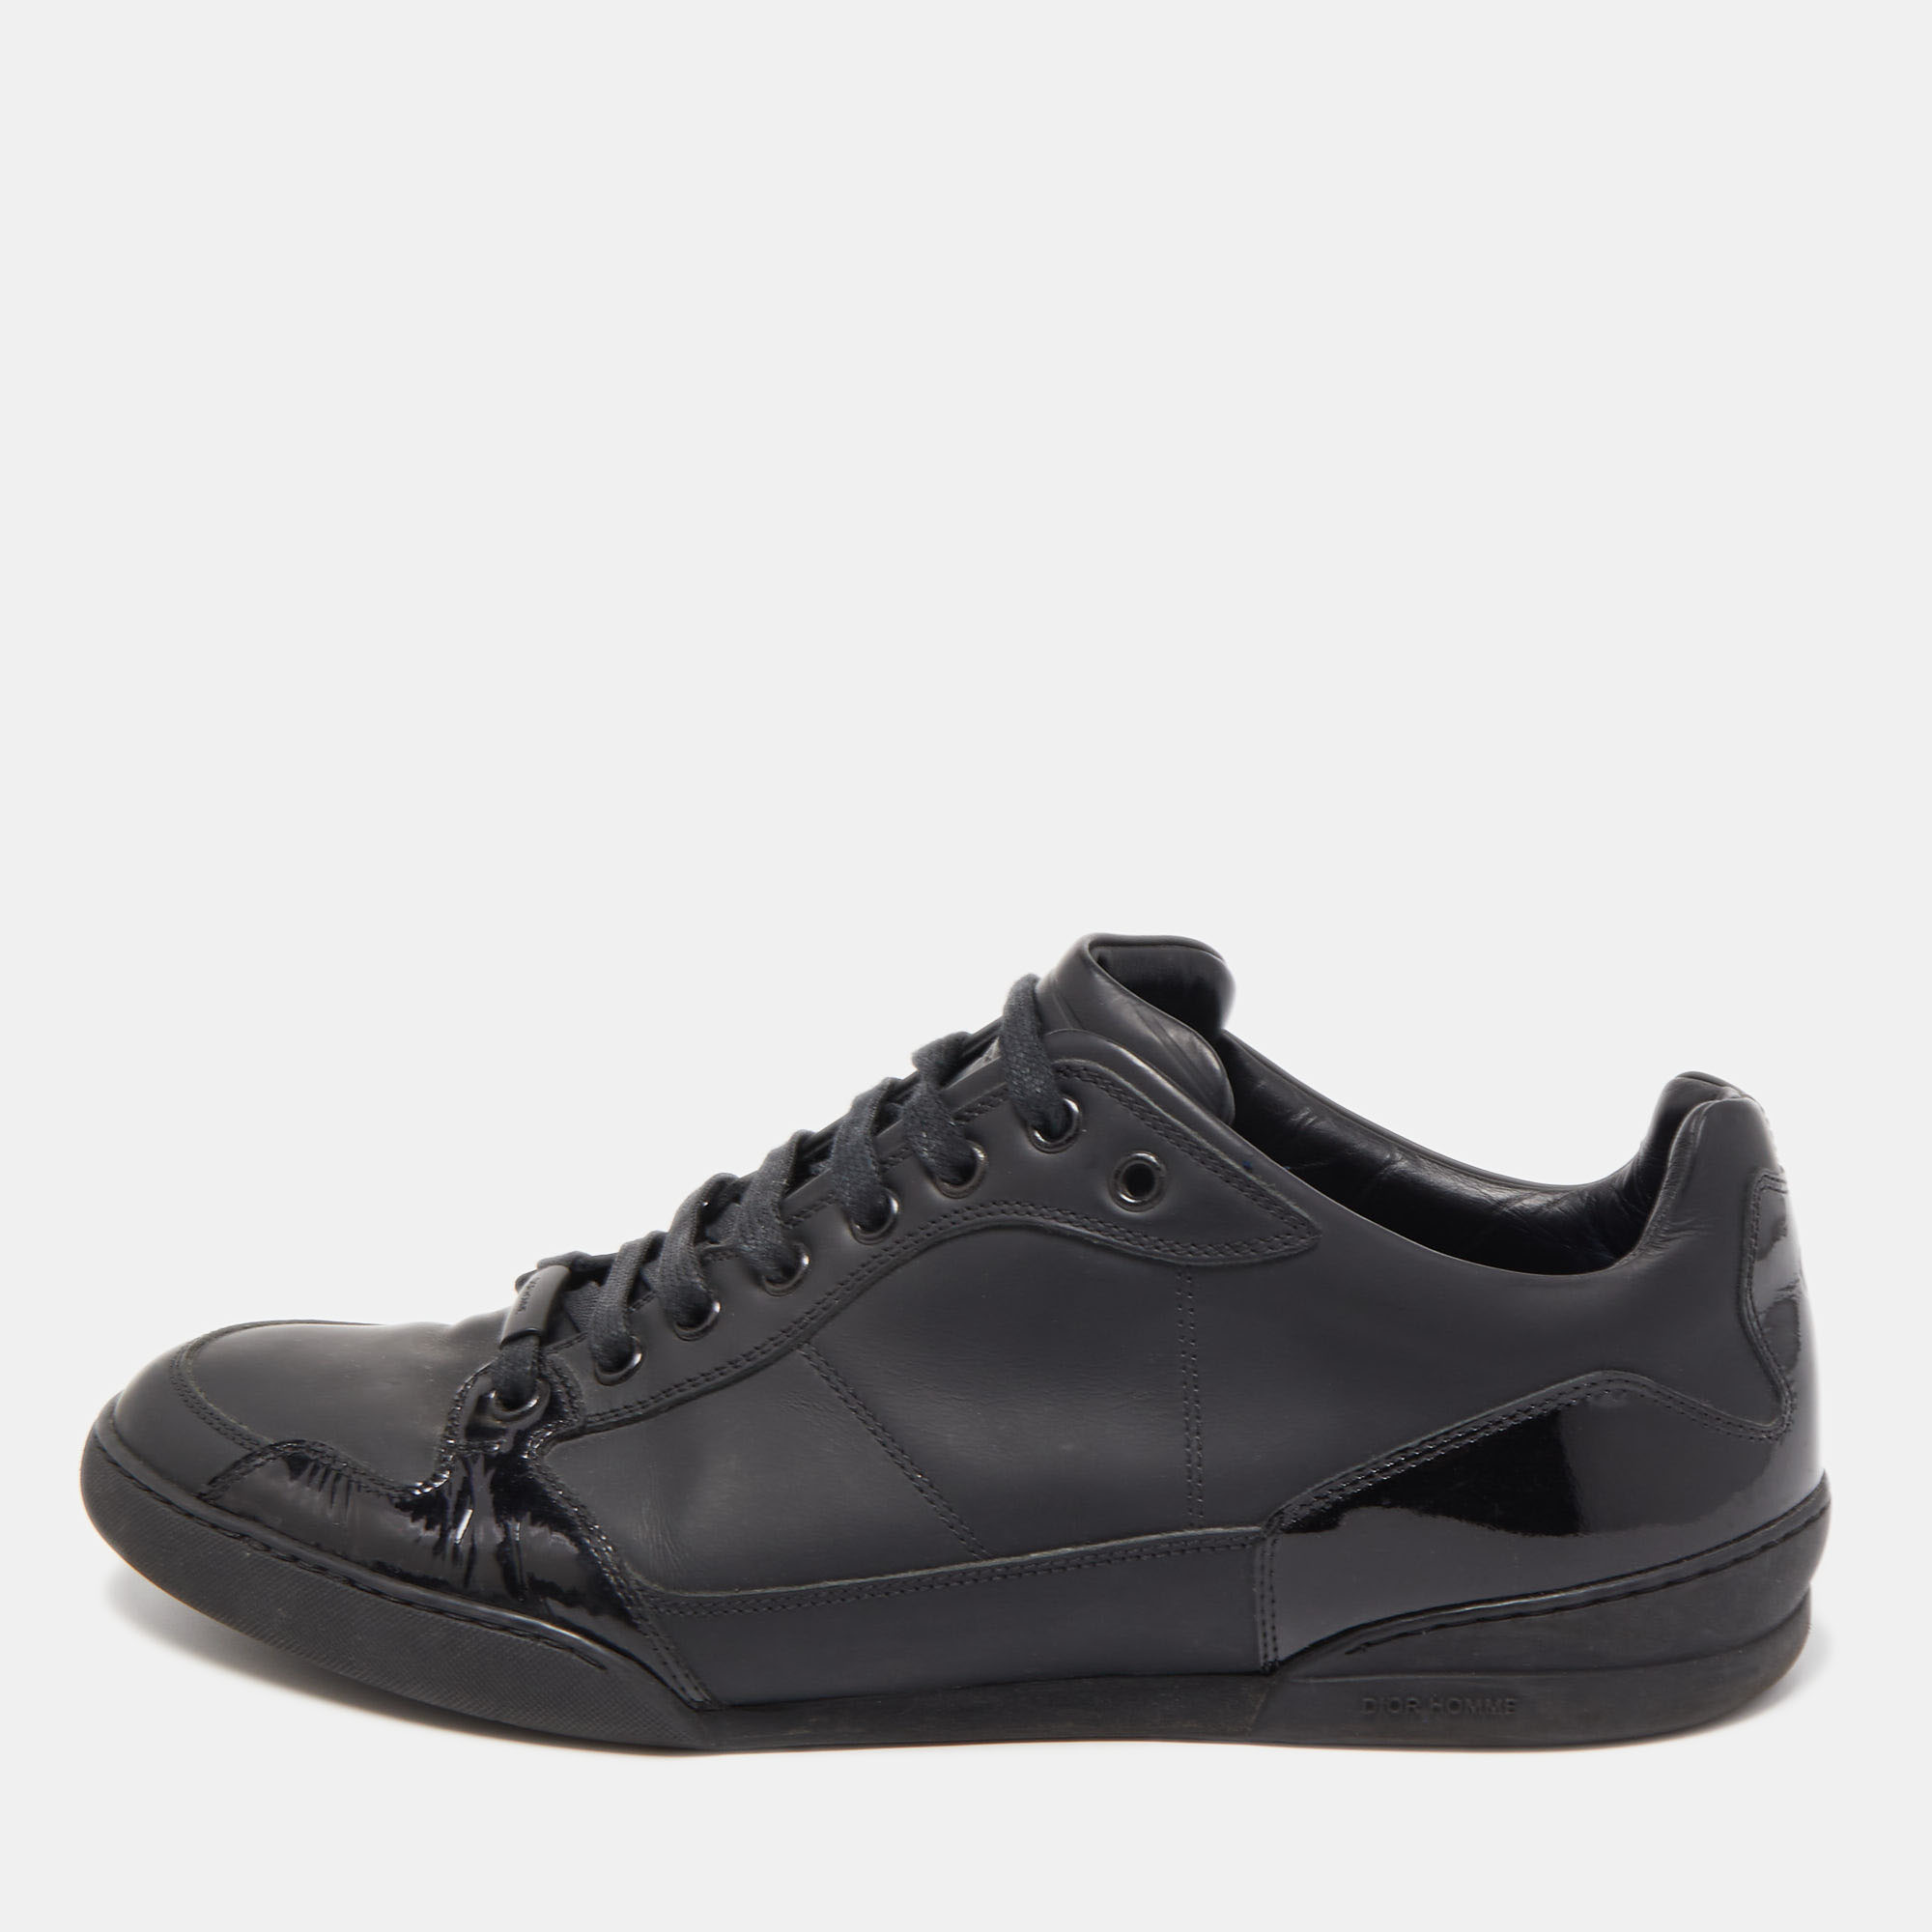 Dior Black Patent And Leather Low Top Sneakers Size 42.5